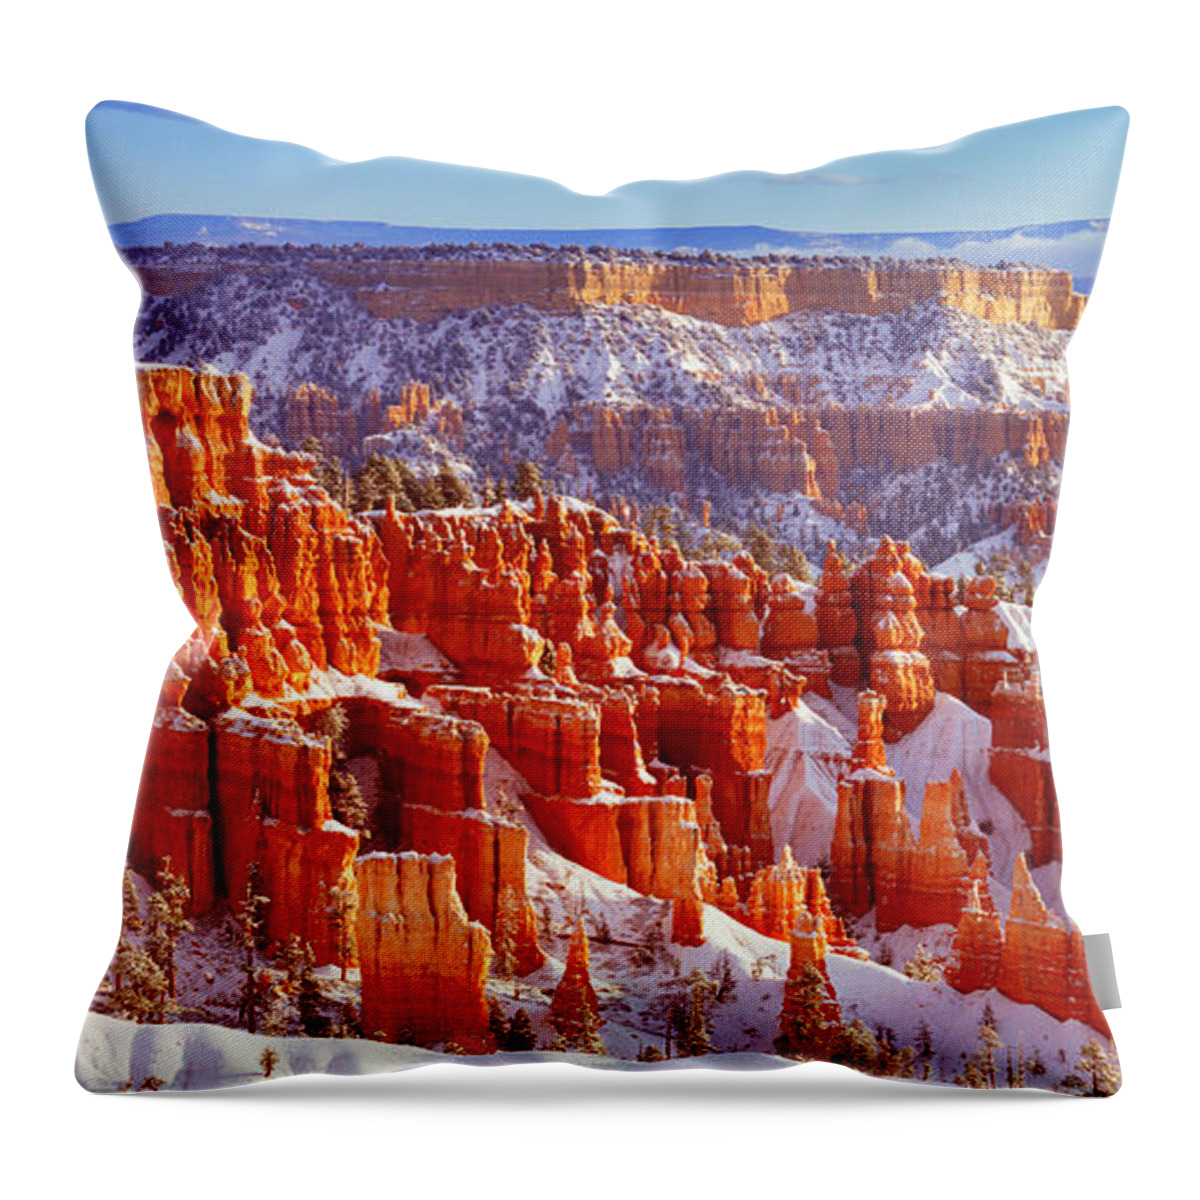 Bryce Canyon National Park Throw Pillow featuring the photograph Bryce Canyon Panorama by Benedict Heekwan Yang